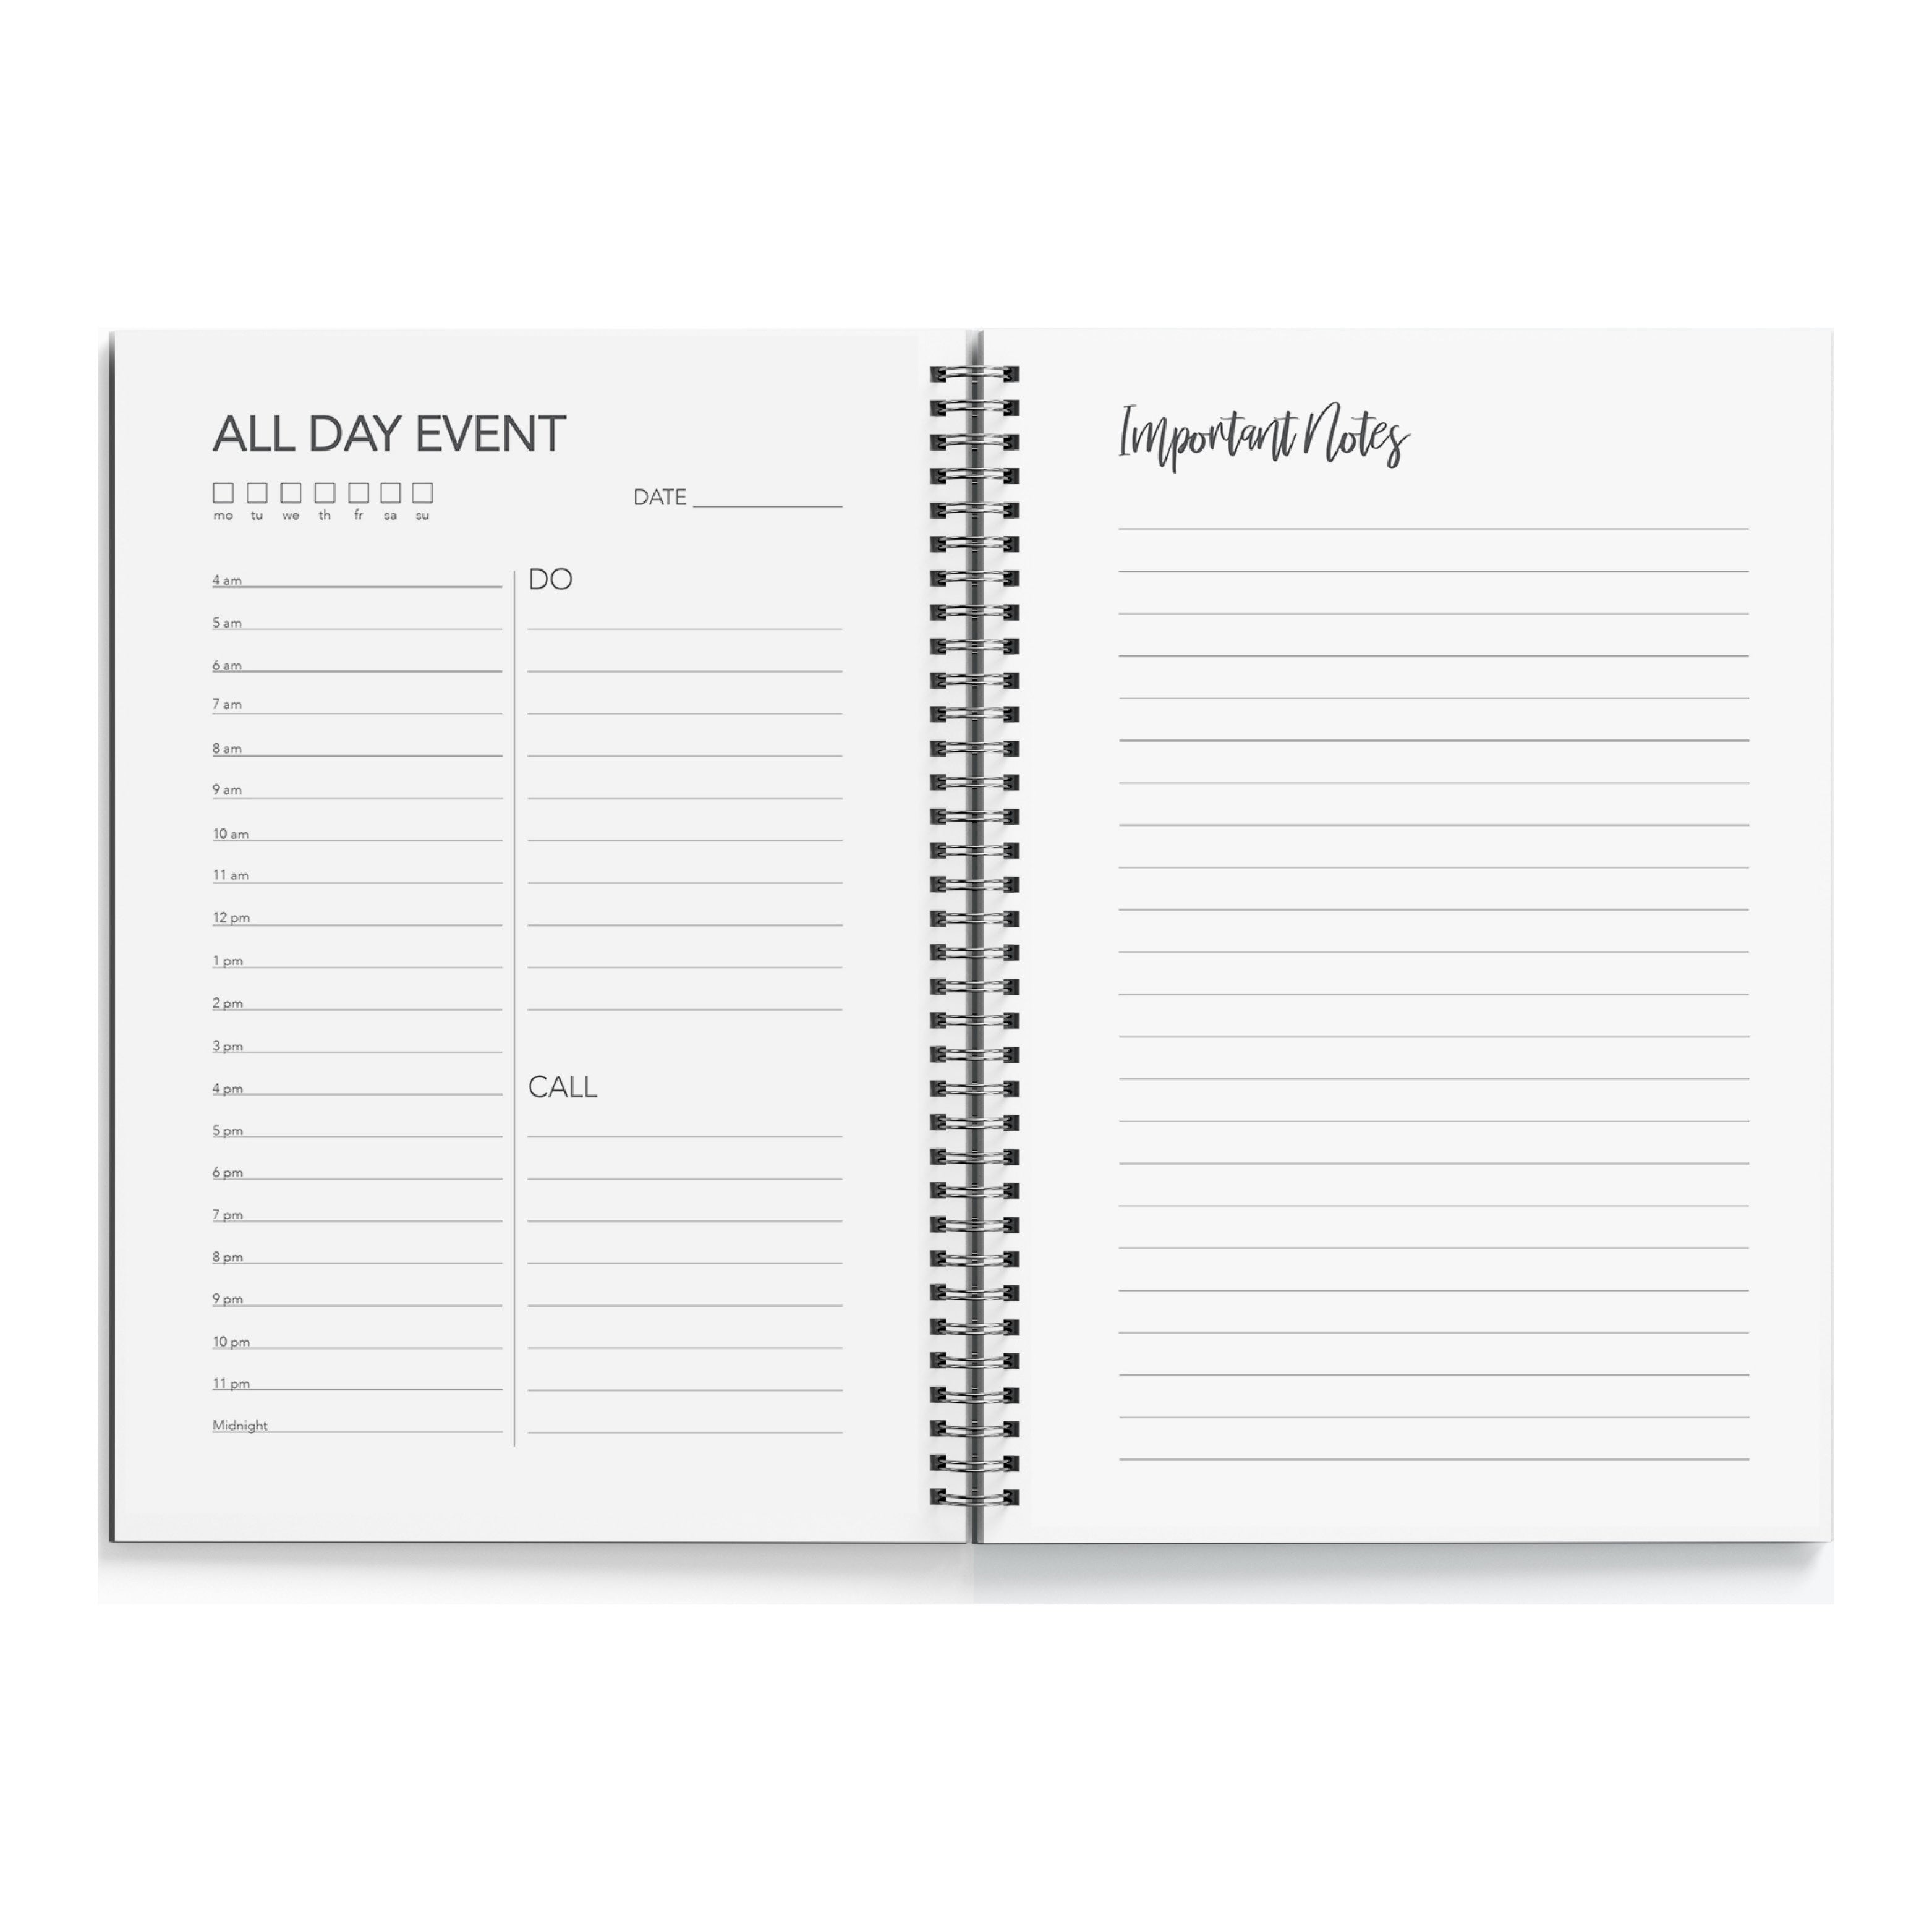 Daily Planner - The Traditional